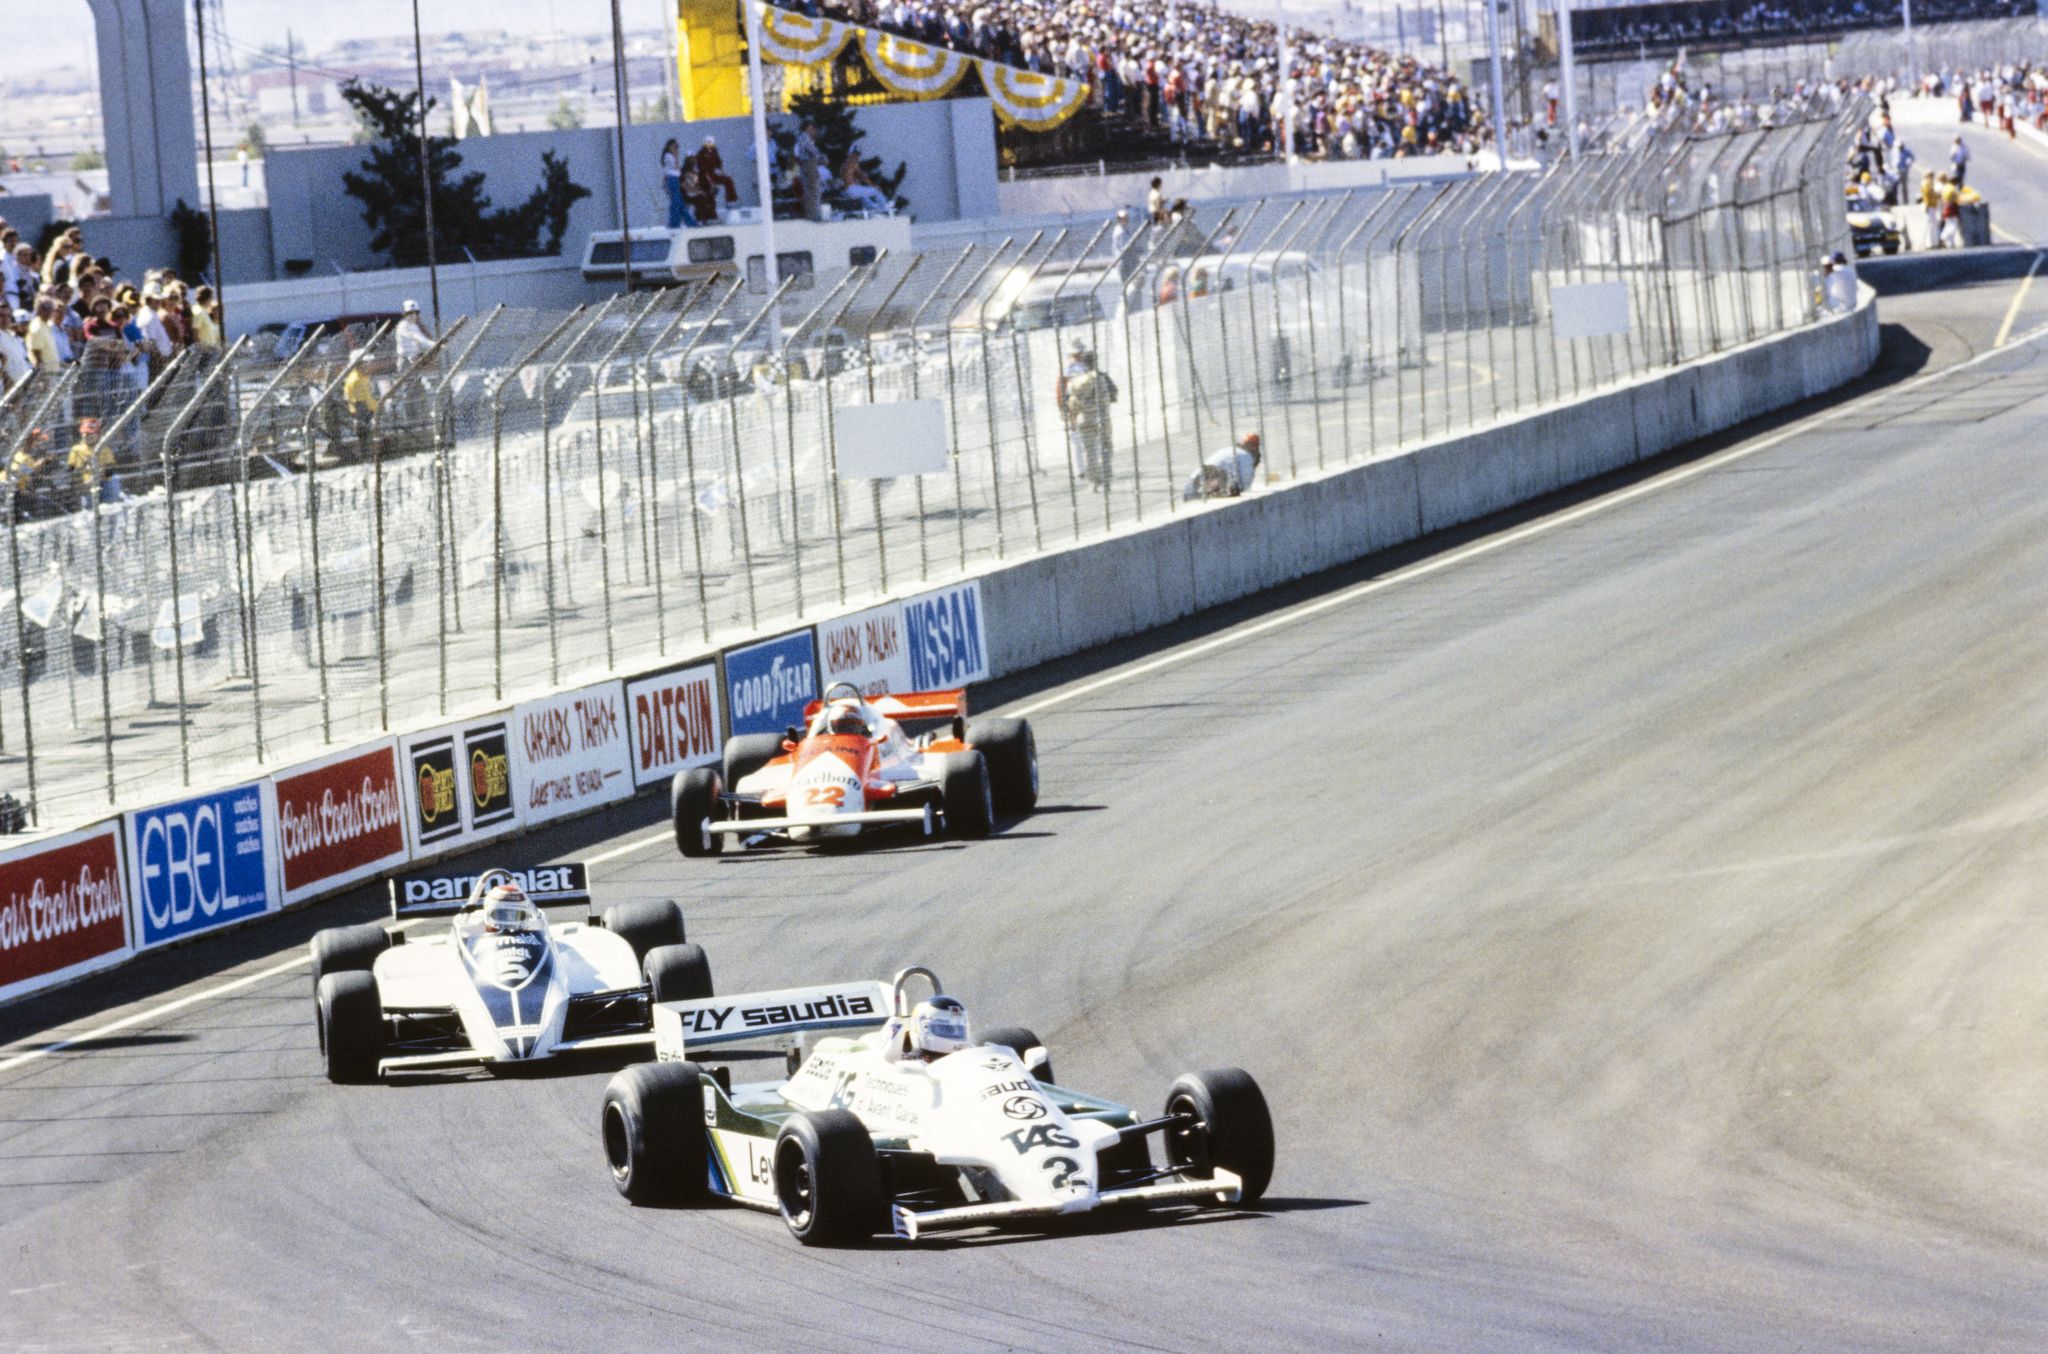 streets of las vegas, united states of america october 17 carlos reutemann, williams fw07c ford, leads nelson piquet, brabham bt49c ford, and mario andretti, alfa romeo 179c during the caesars palace gp at streets of las vegas on october 17, 1981 in streets of las vegas, united states of america photo by lat images